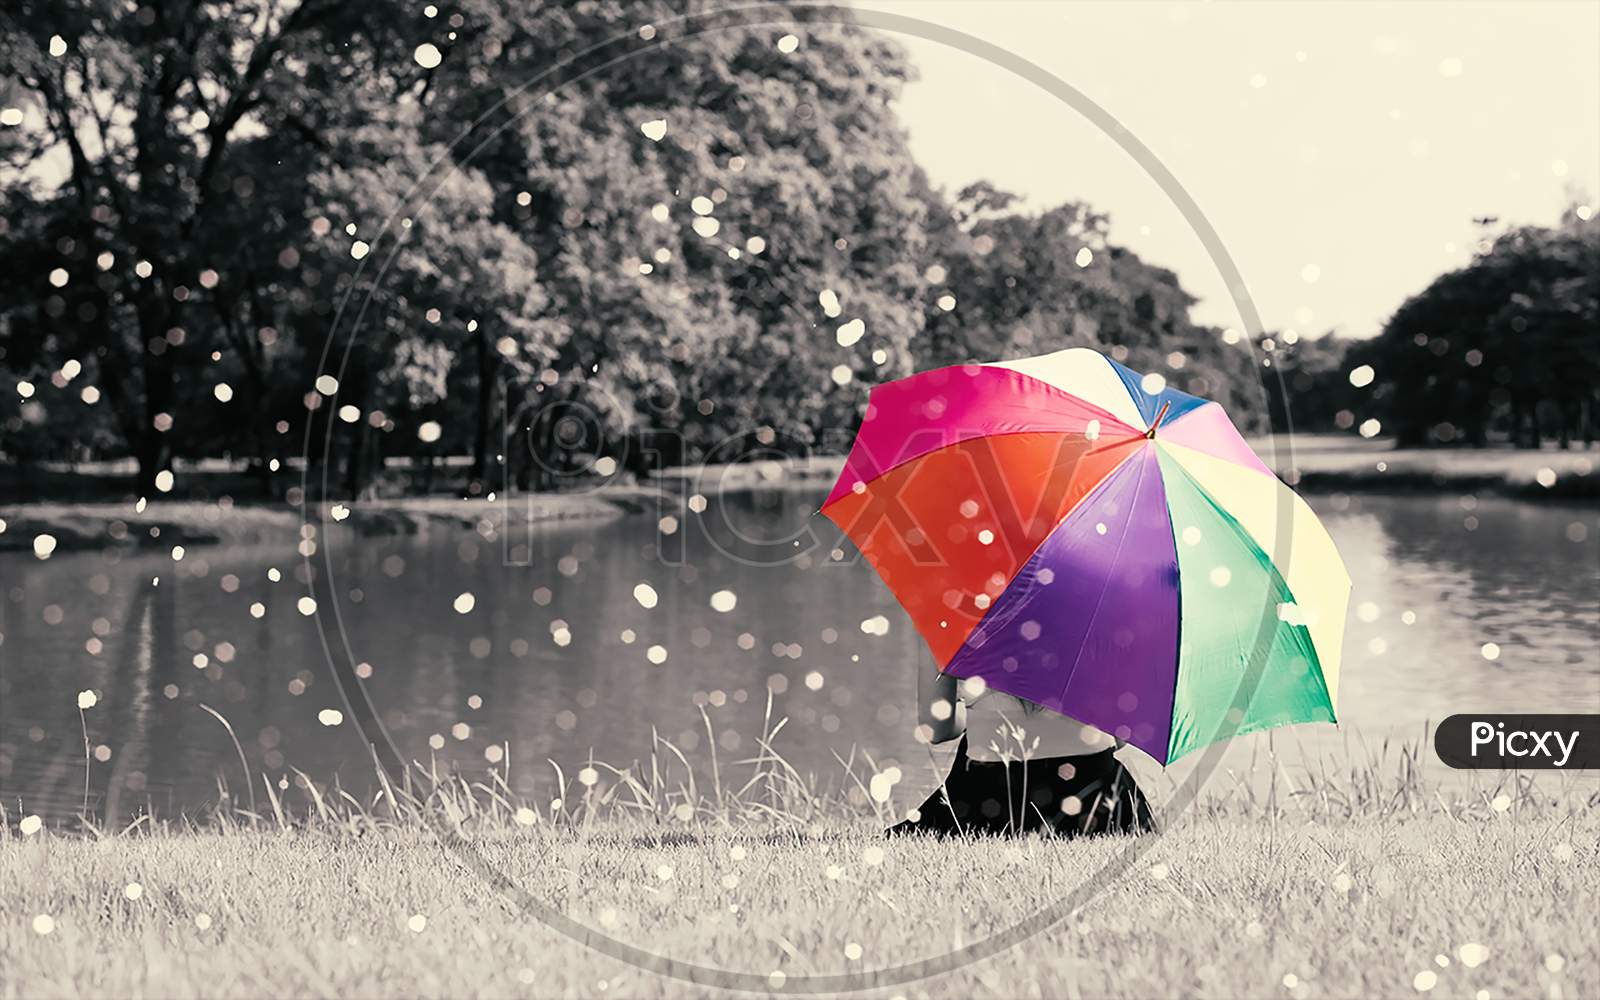 Colorful Rainbow Umbrella Hold By Sitting Woman On Grass Field Near River At Outdoor With Full Of Nature And Rain, Relax Concept, Beauty Concept, Lonely Concept, Selective Color, Sepia Dramatic Tone